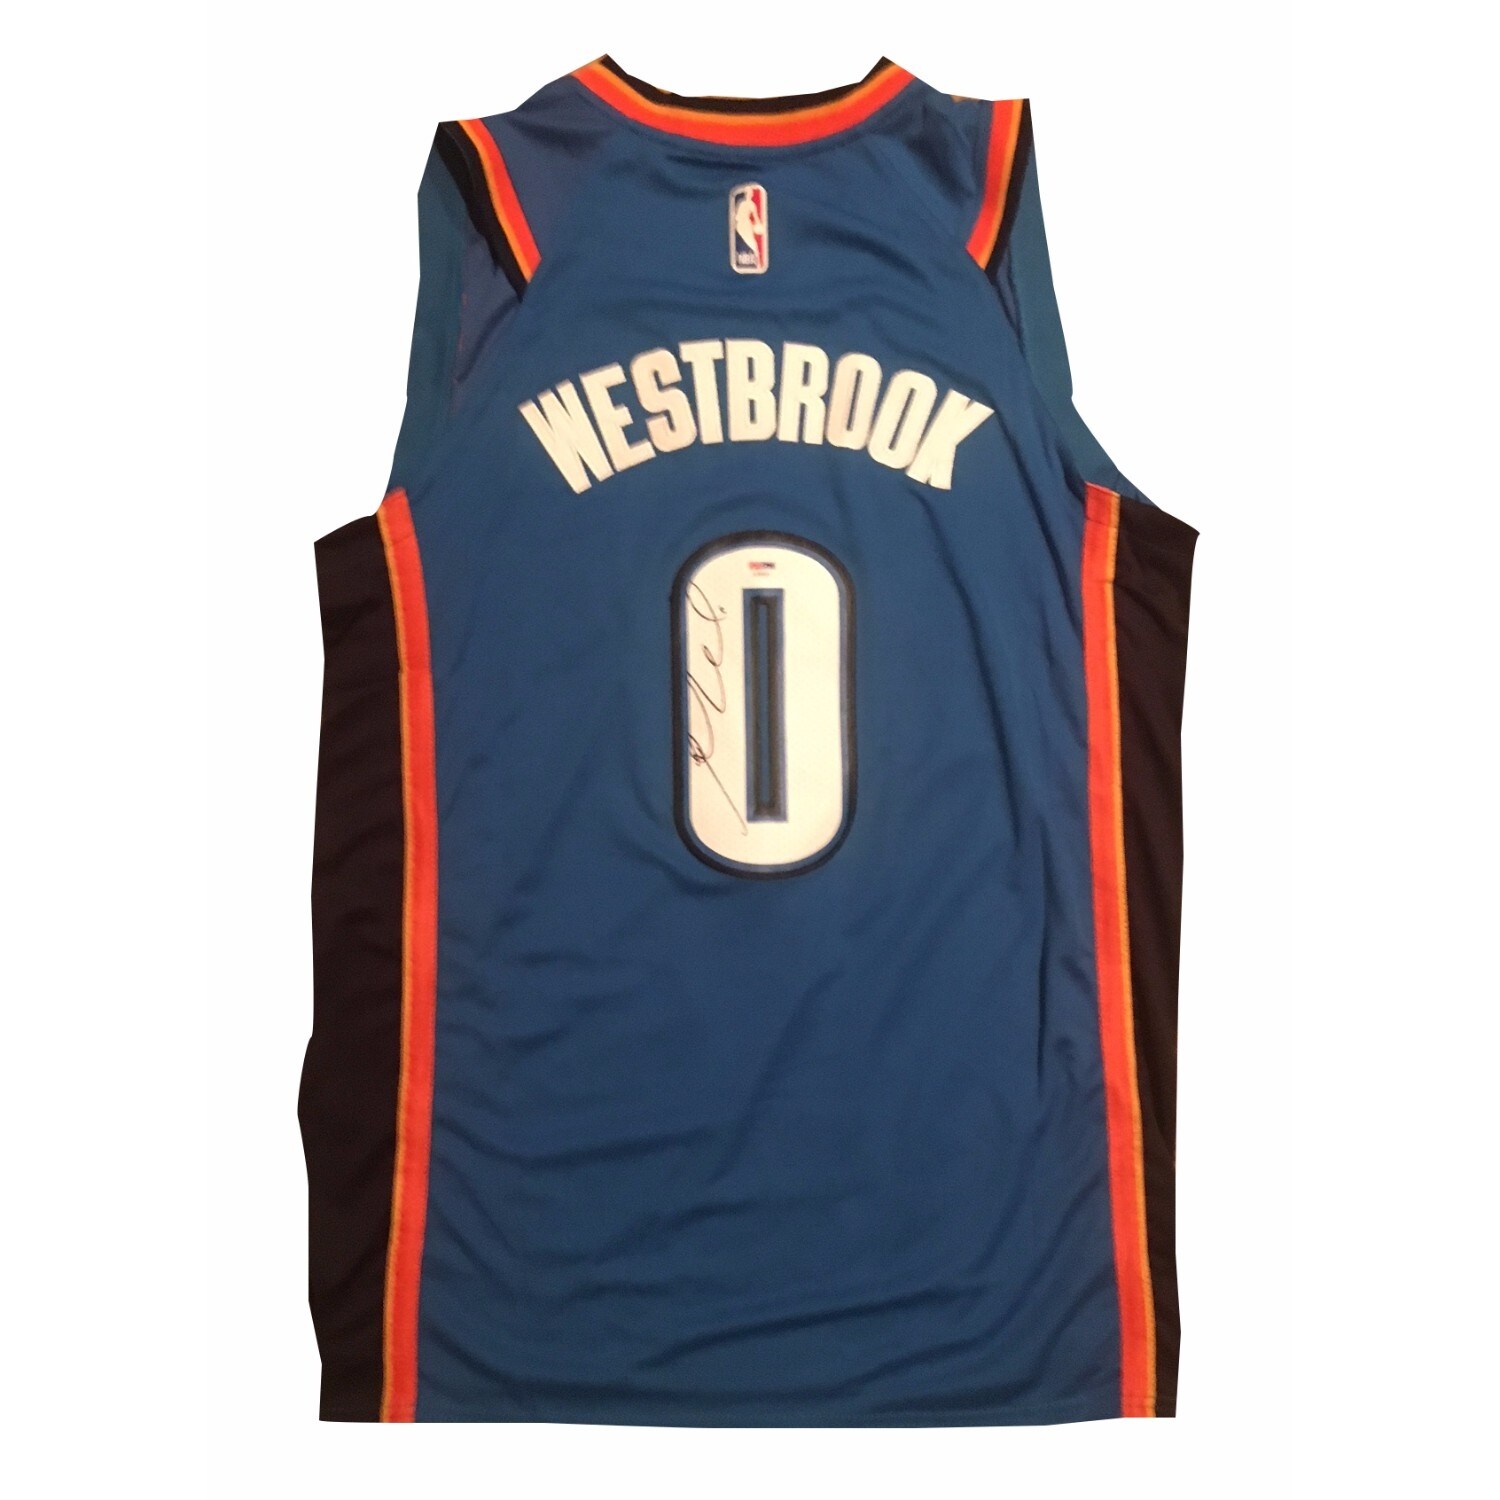 russell westbrook autographed jersey